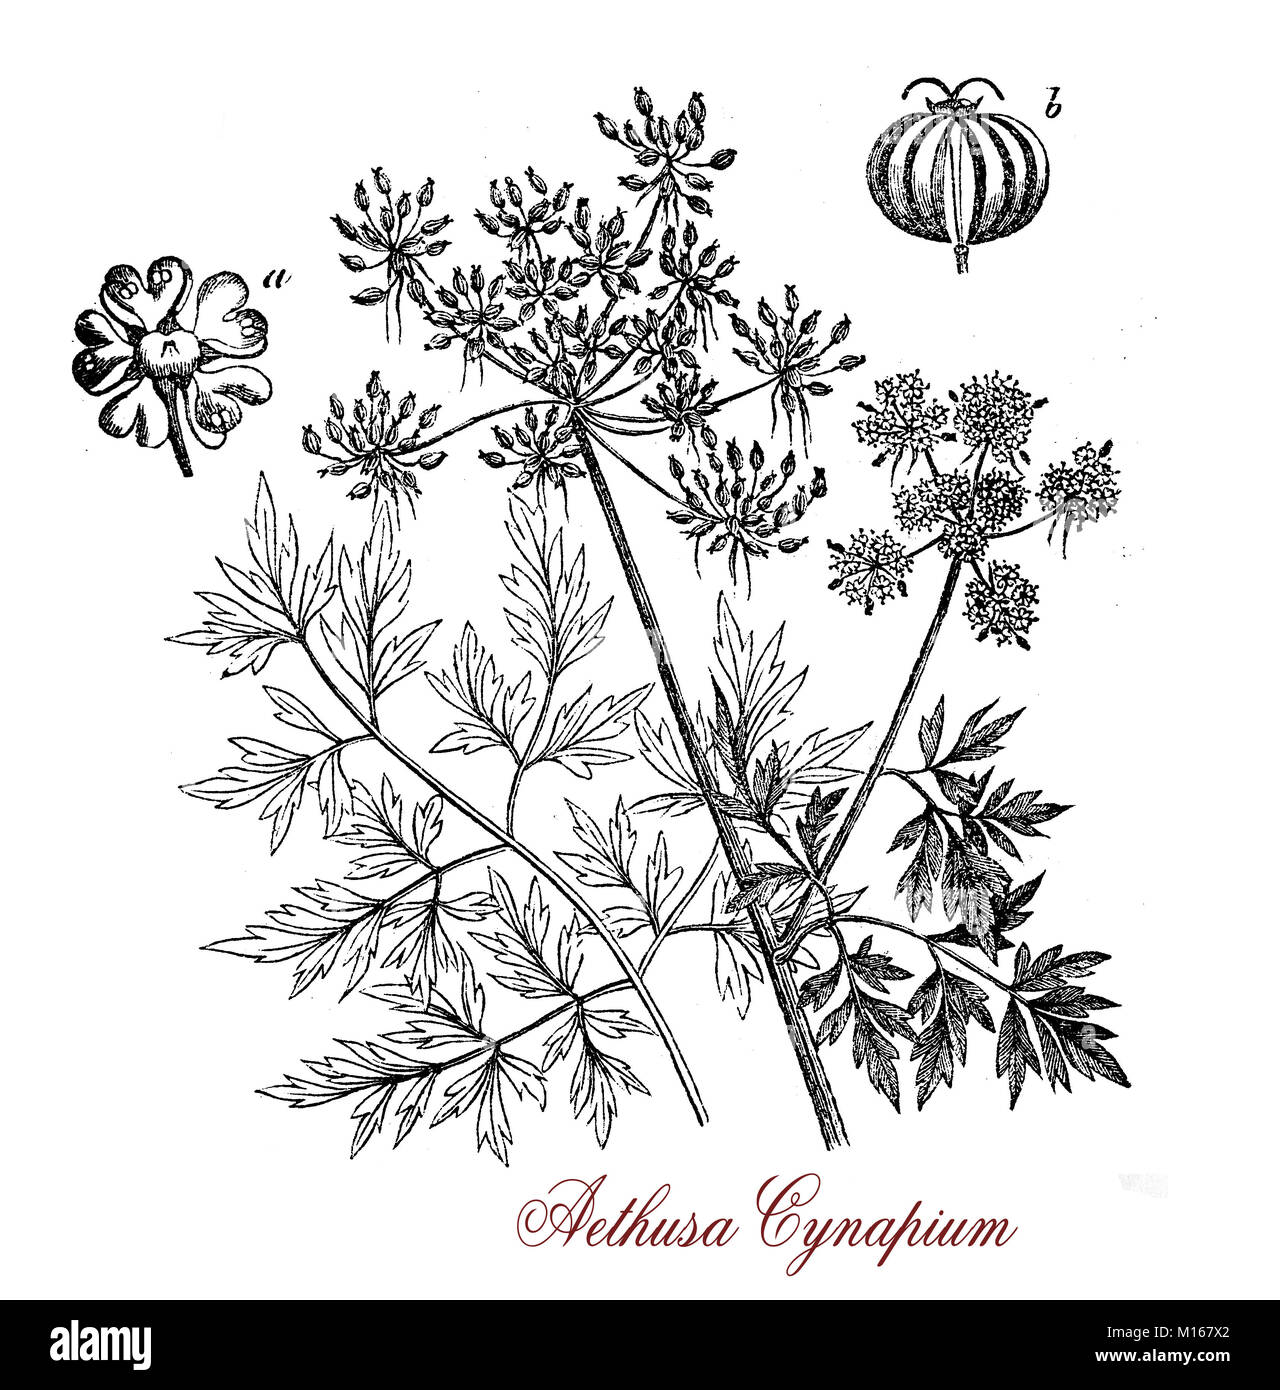 Vintage print of Aethusa cynapium or poison parsley, common poisonous herb with white inflorescences and an unpleasant smell Stock Photo